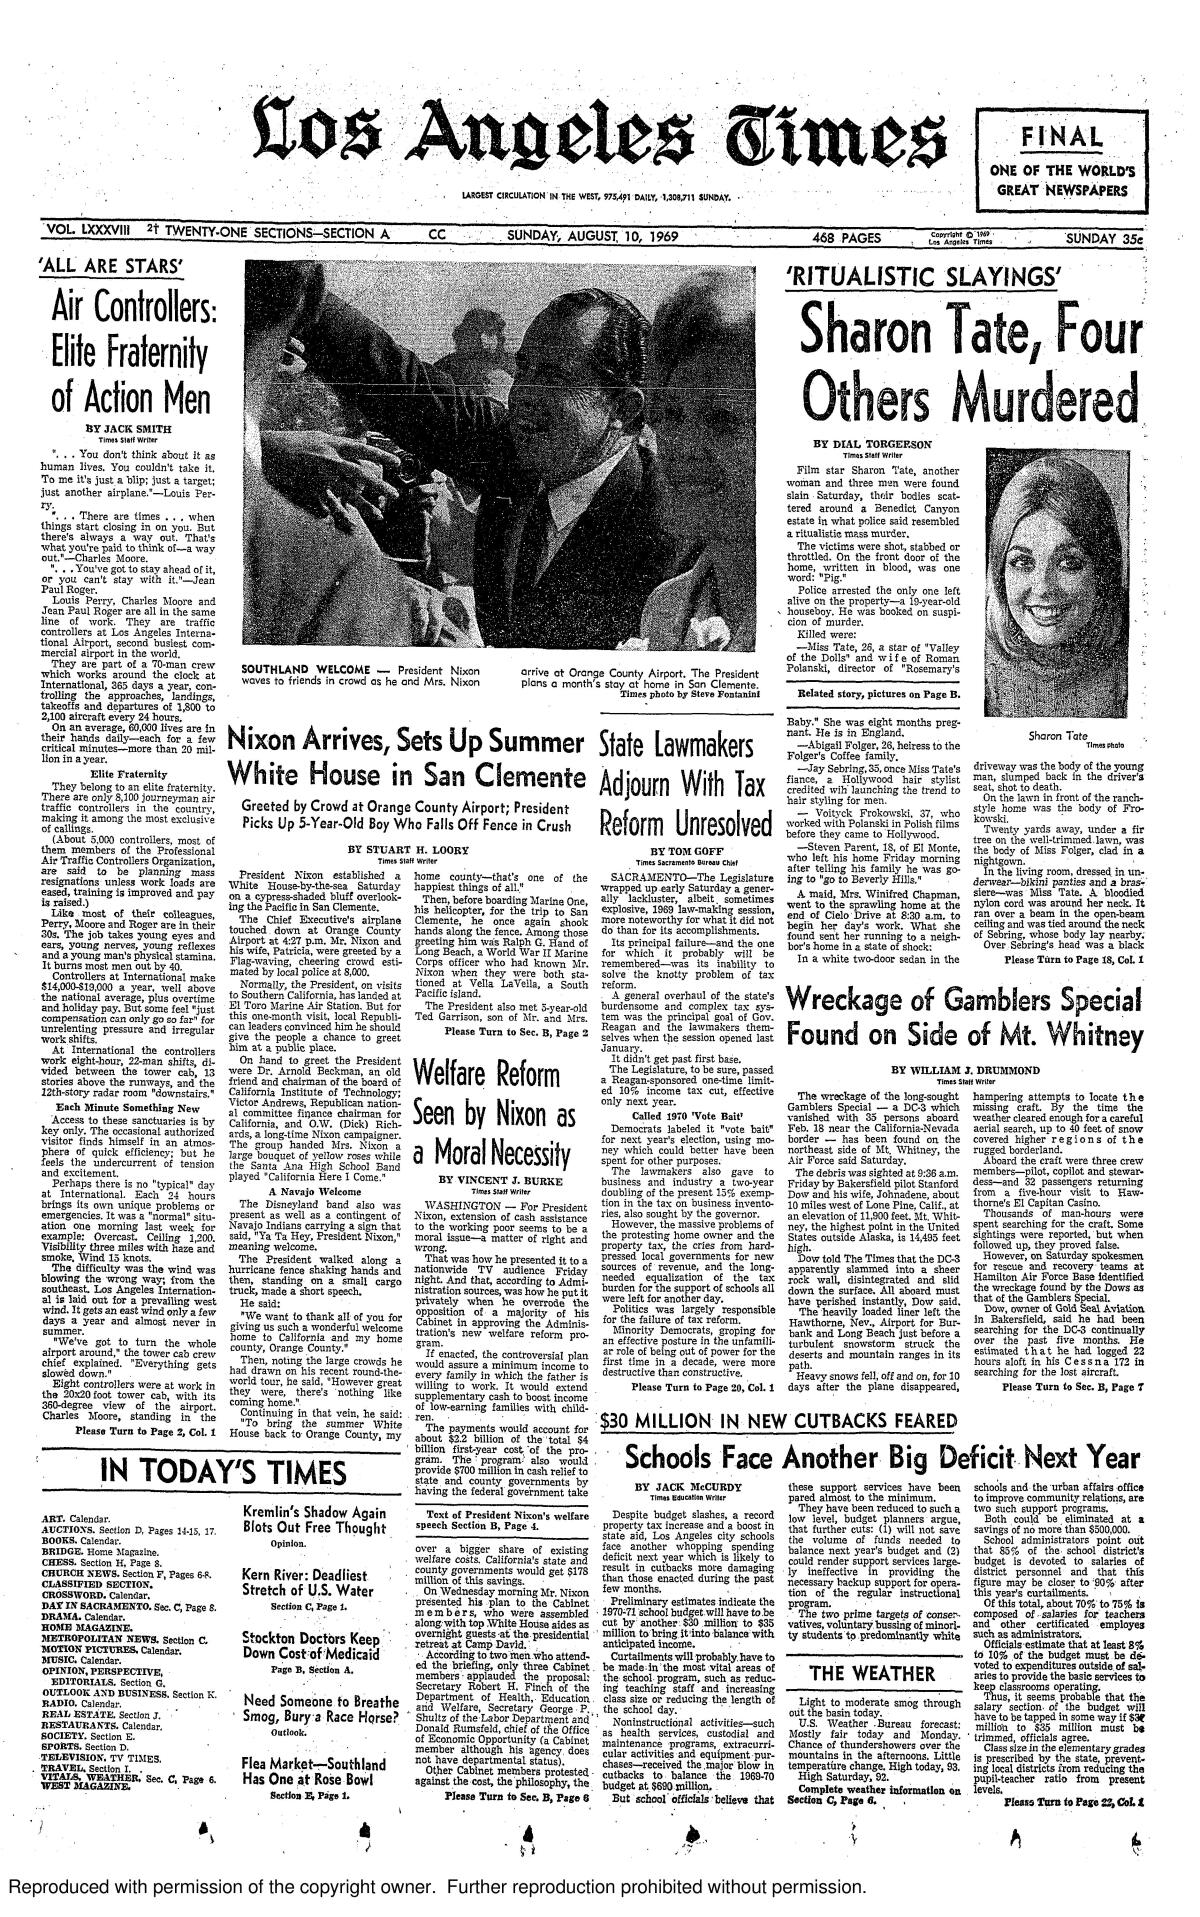 The front page of the Los Angeles Times on Aug. 10, 1969